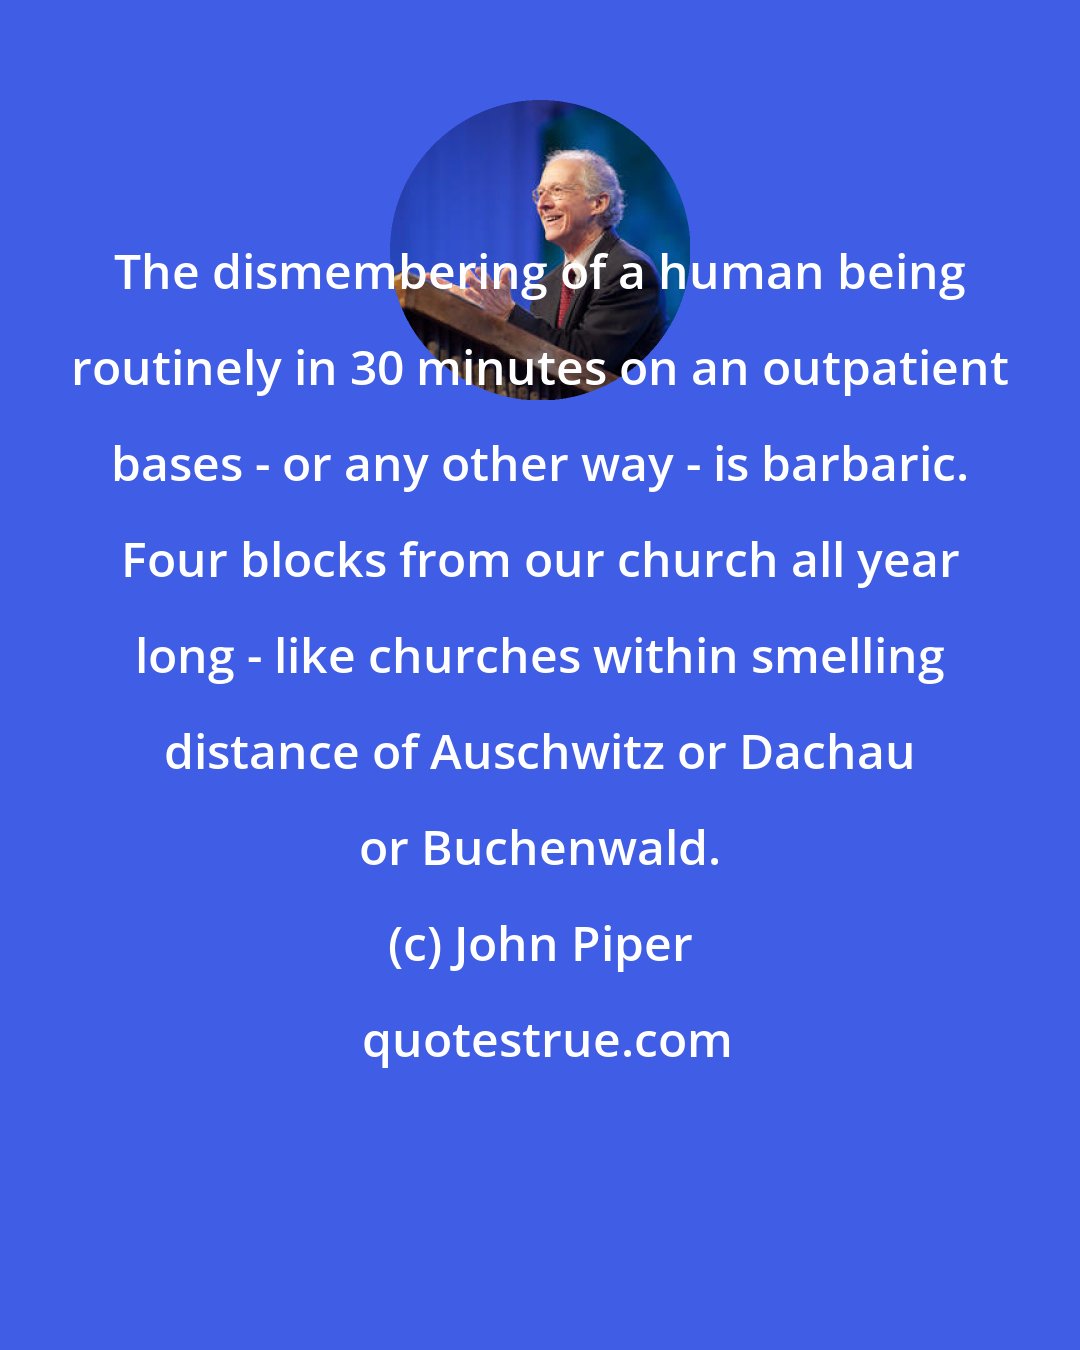 John Piper: The dismembering of a human being routinely in 30 minutes on an outpatient bases - or any other way - is barbaric. Four blocks from our church all year long - like churches within smelling distance of Auschwitz or Dachau or Buchenwald.